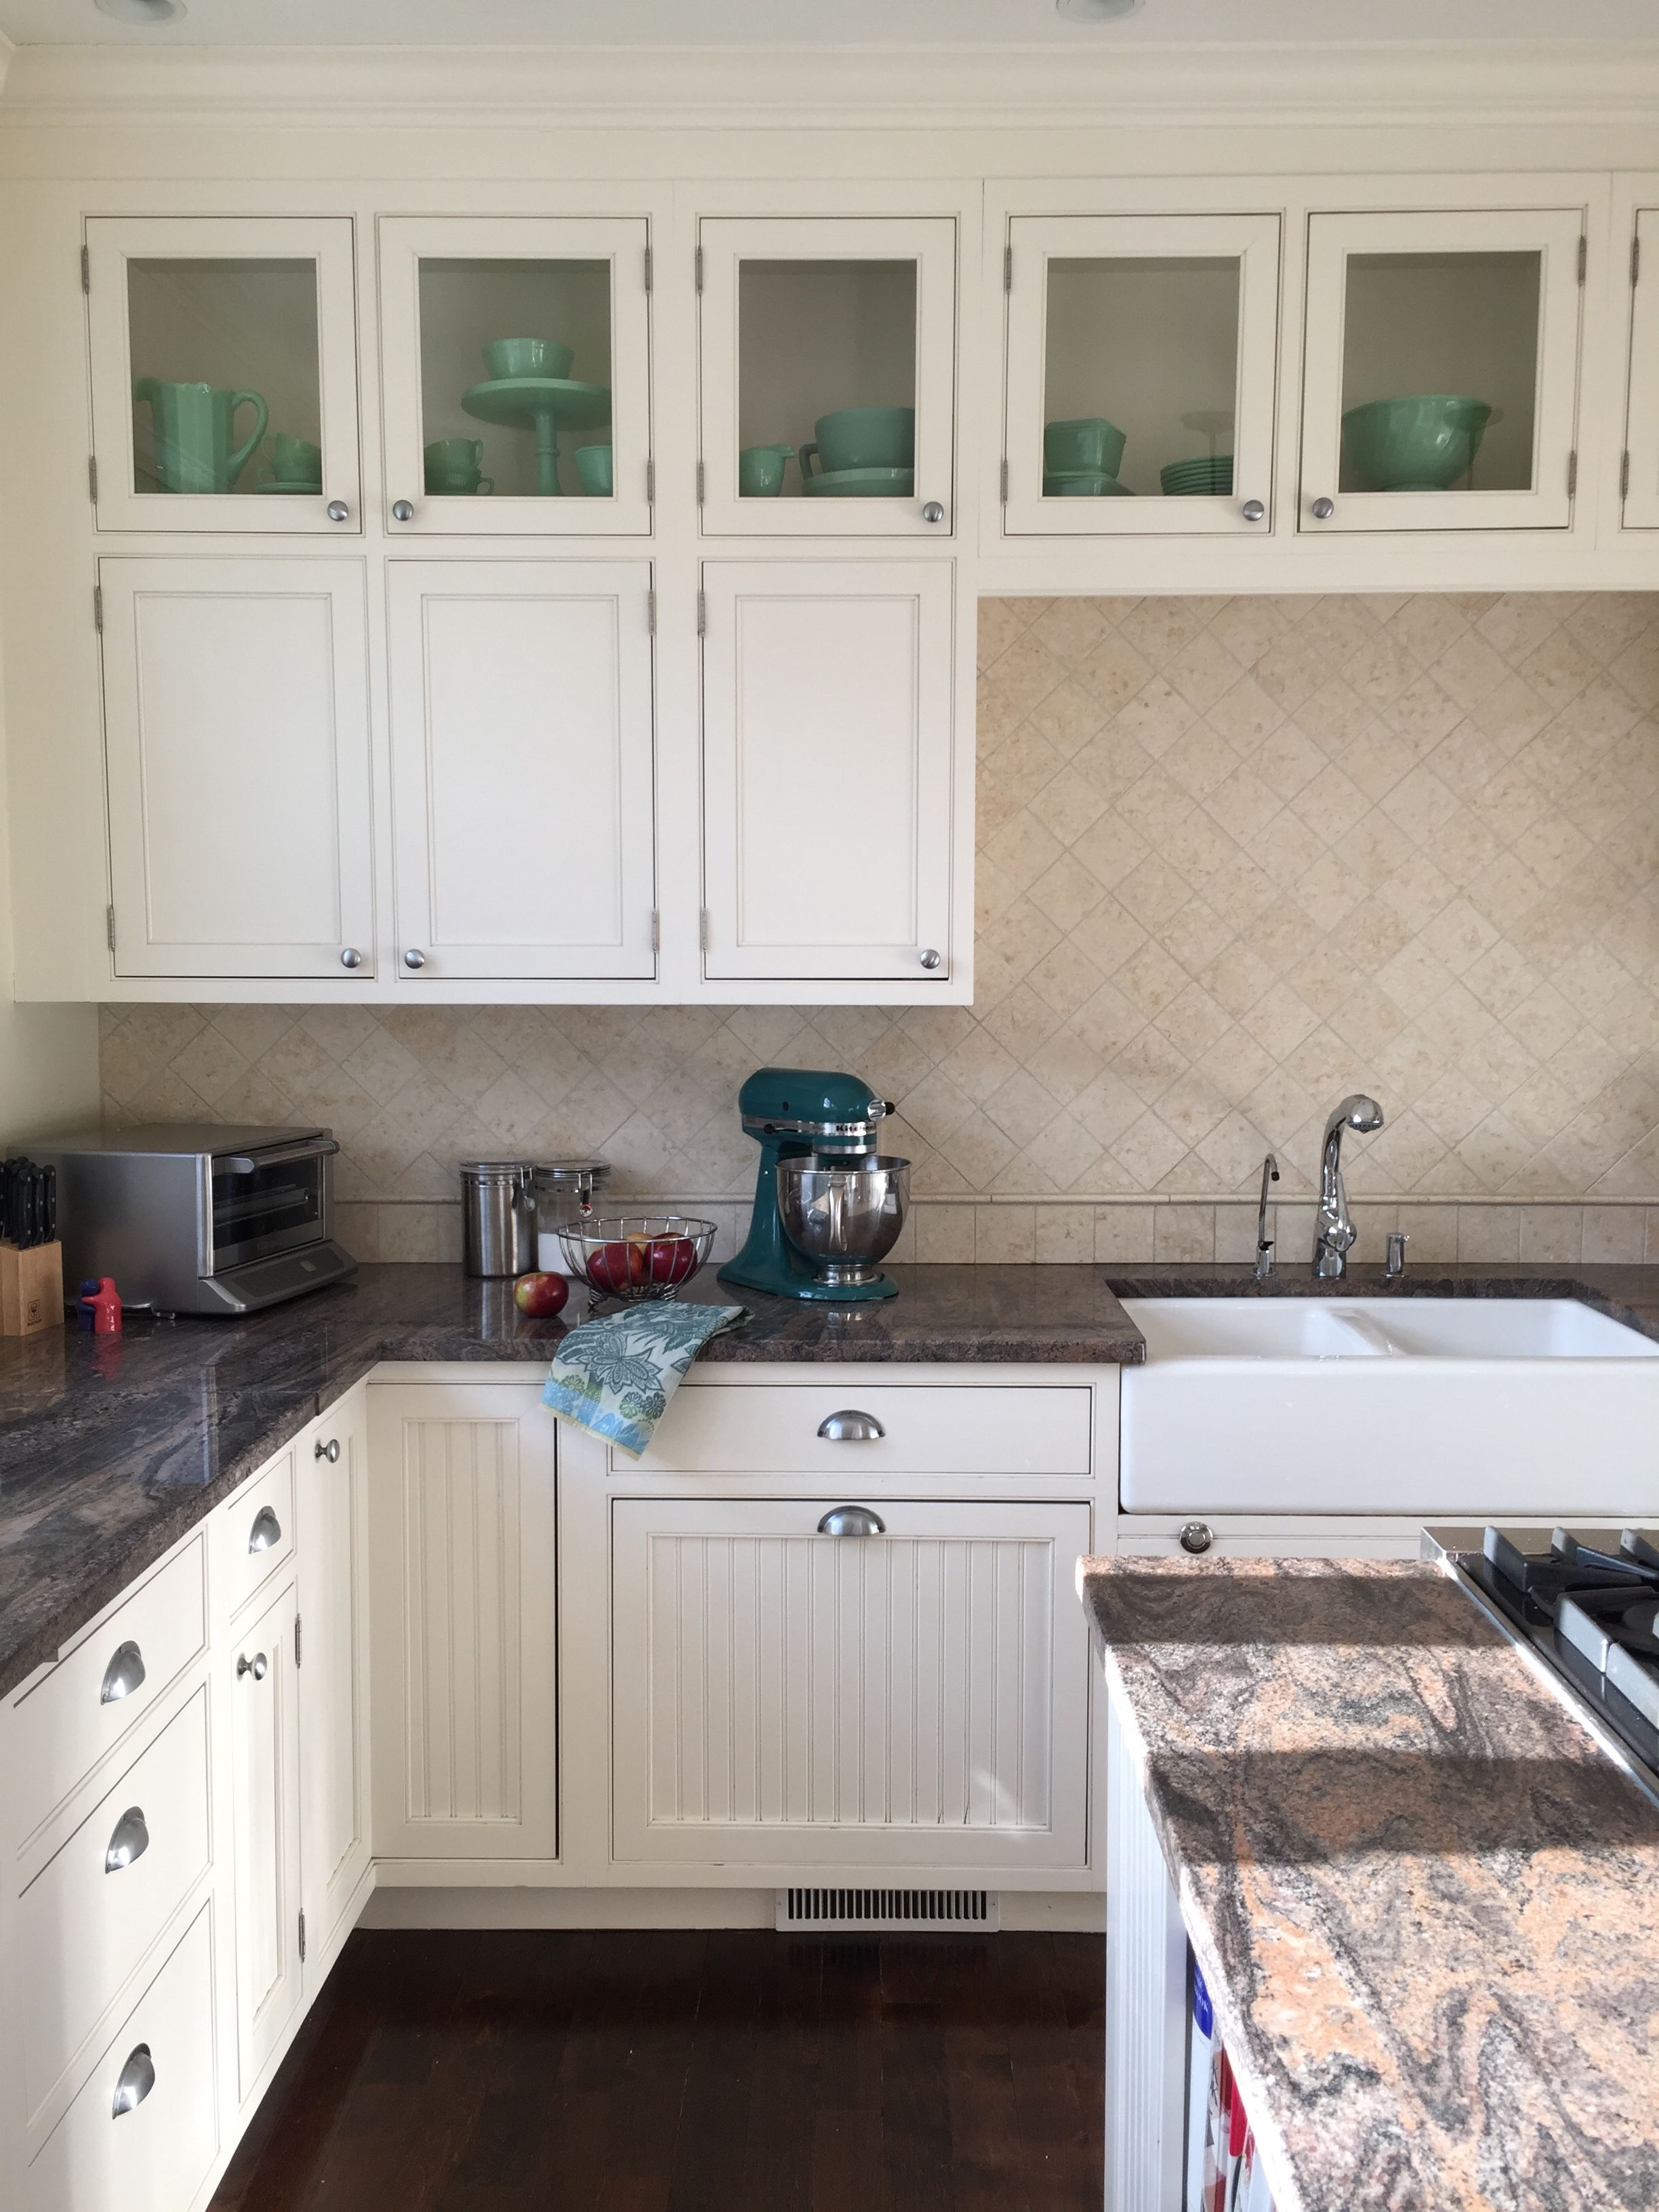 Project 1896: Kitchen Plans! (BEFORE) | Kelly Rogers Interiors | Interiors for Families